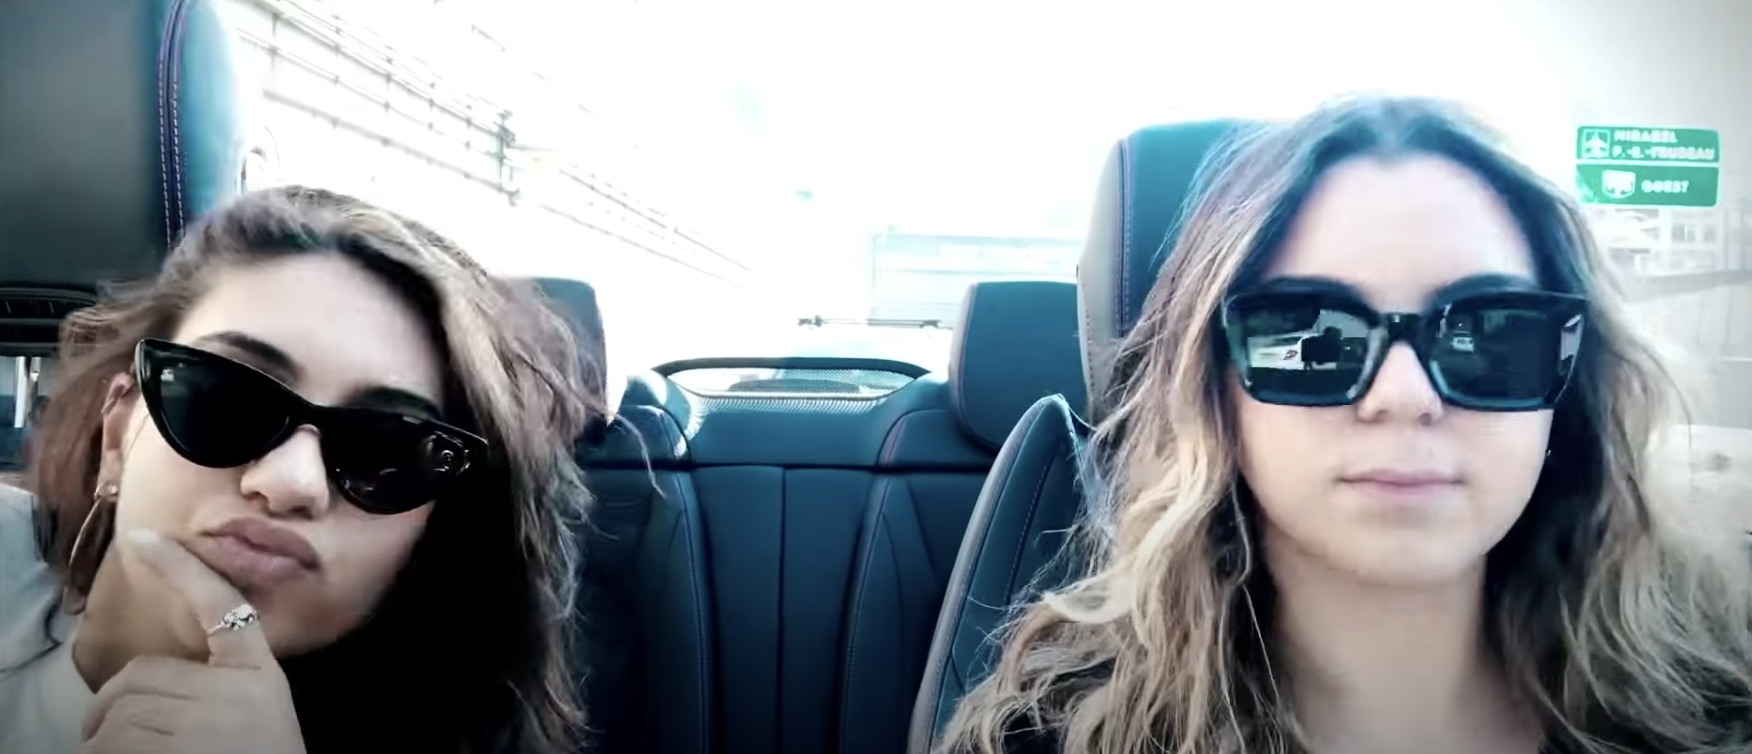 Alessia and her friend in the car with sunglasses on